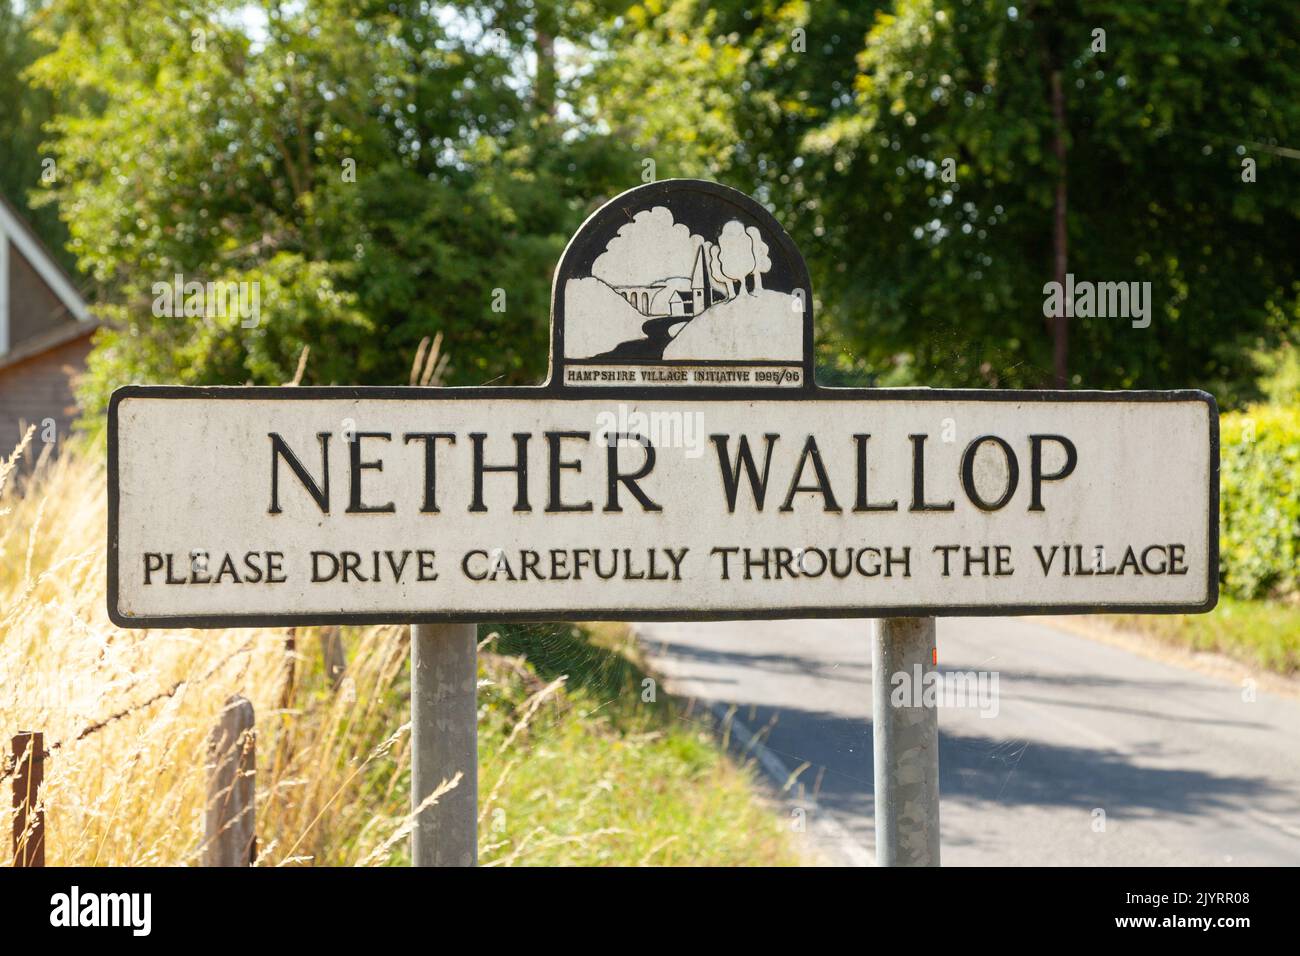 An old metal village sign for the Hampshire village of Nether Wallop Stock Photo